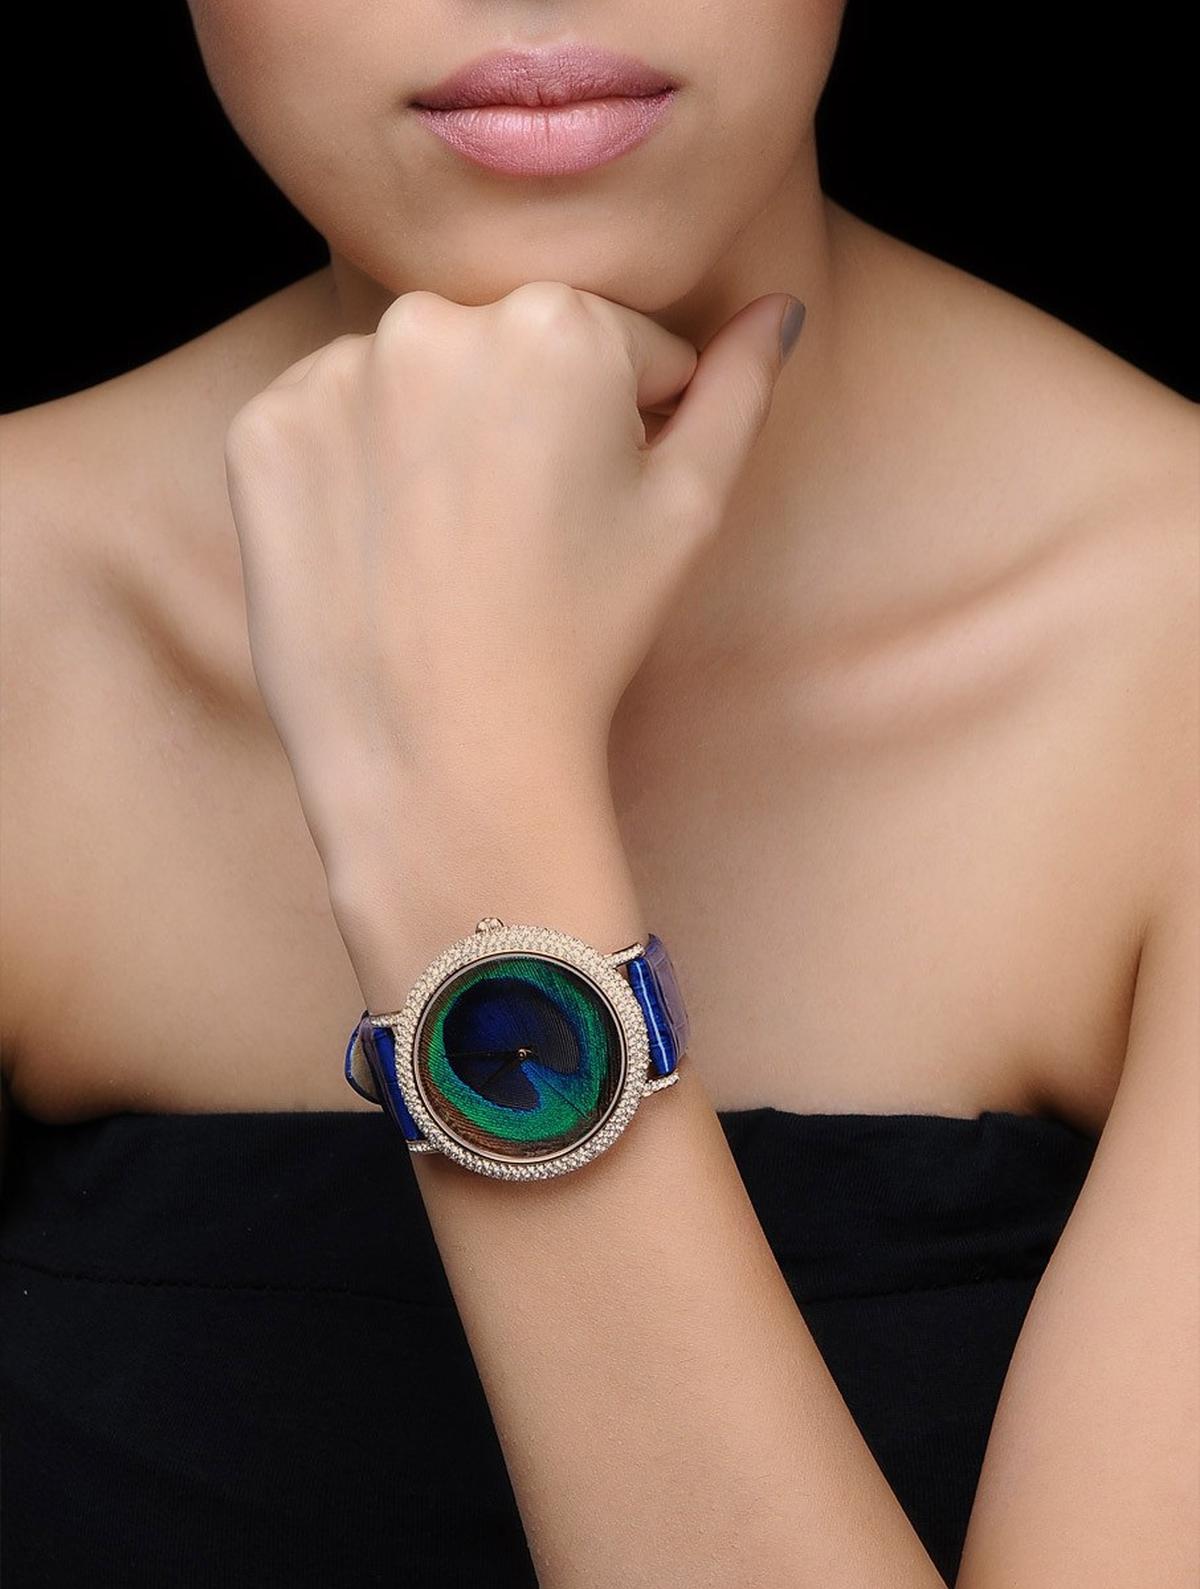 A peacock-themed watch that uses a real, fallen peacock feather in the dial